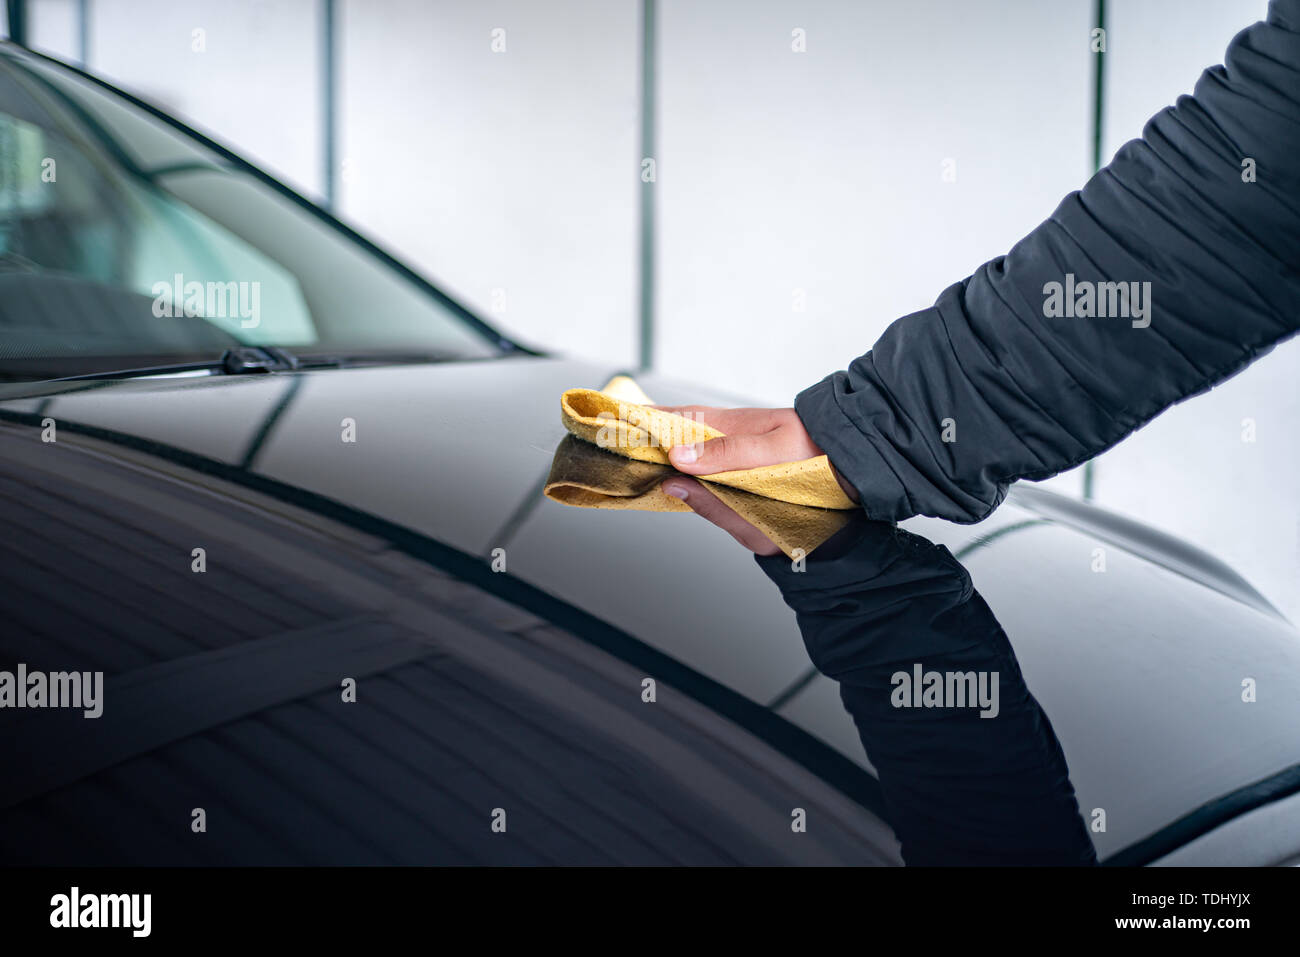 A person polishes the bonnet on his car with a leather cloth Stock Photo